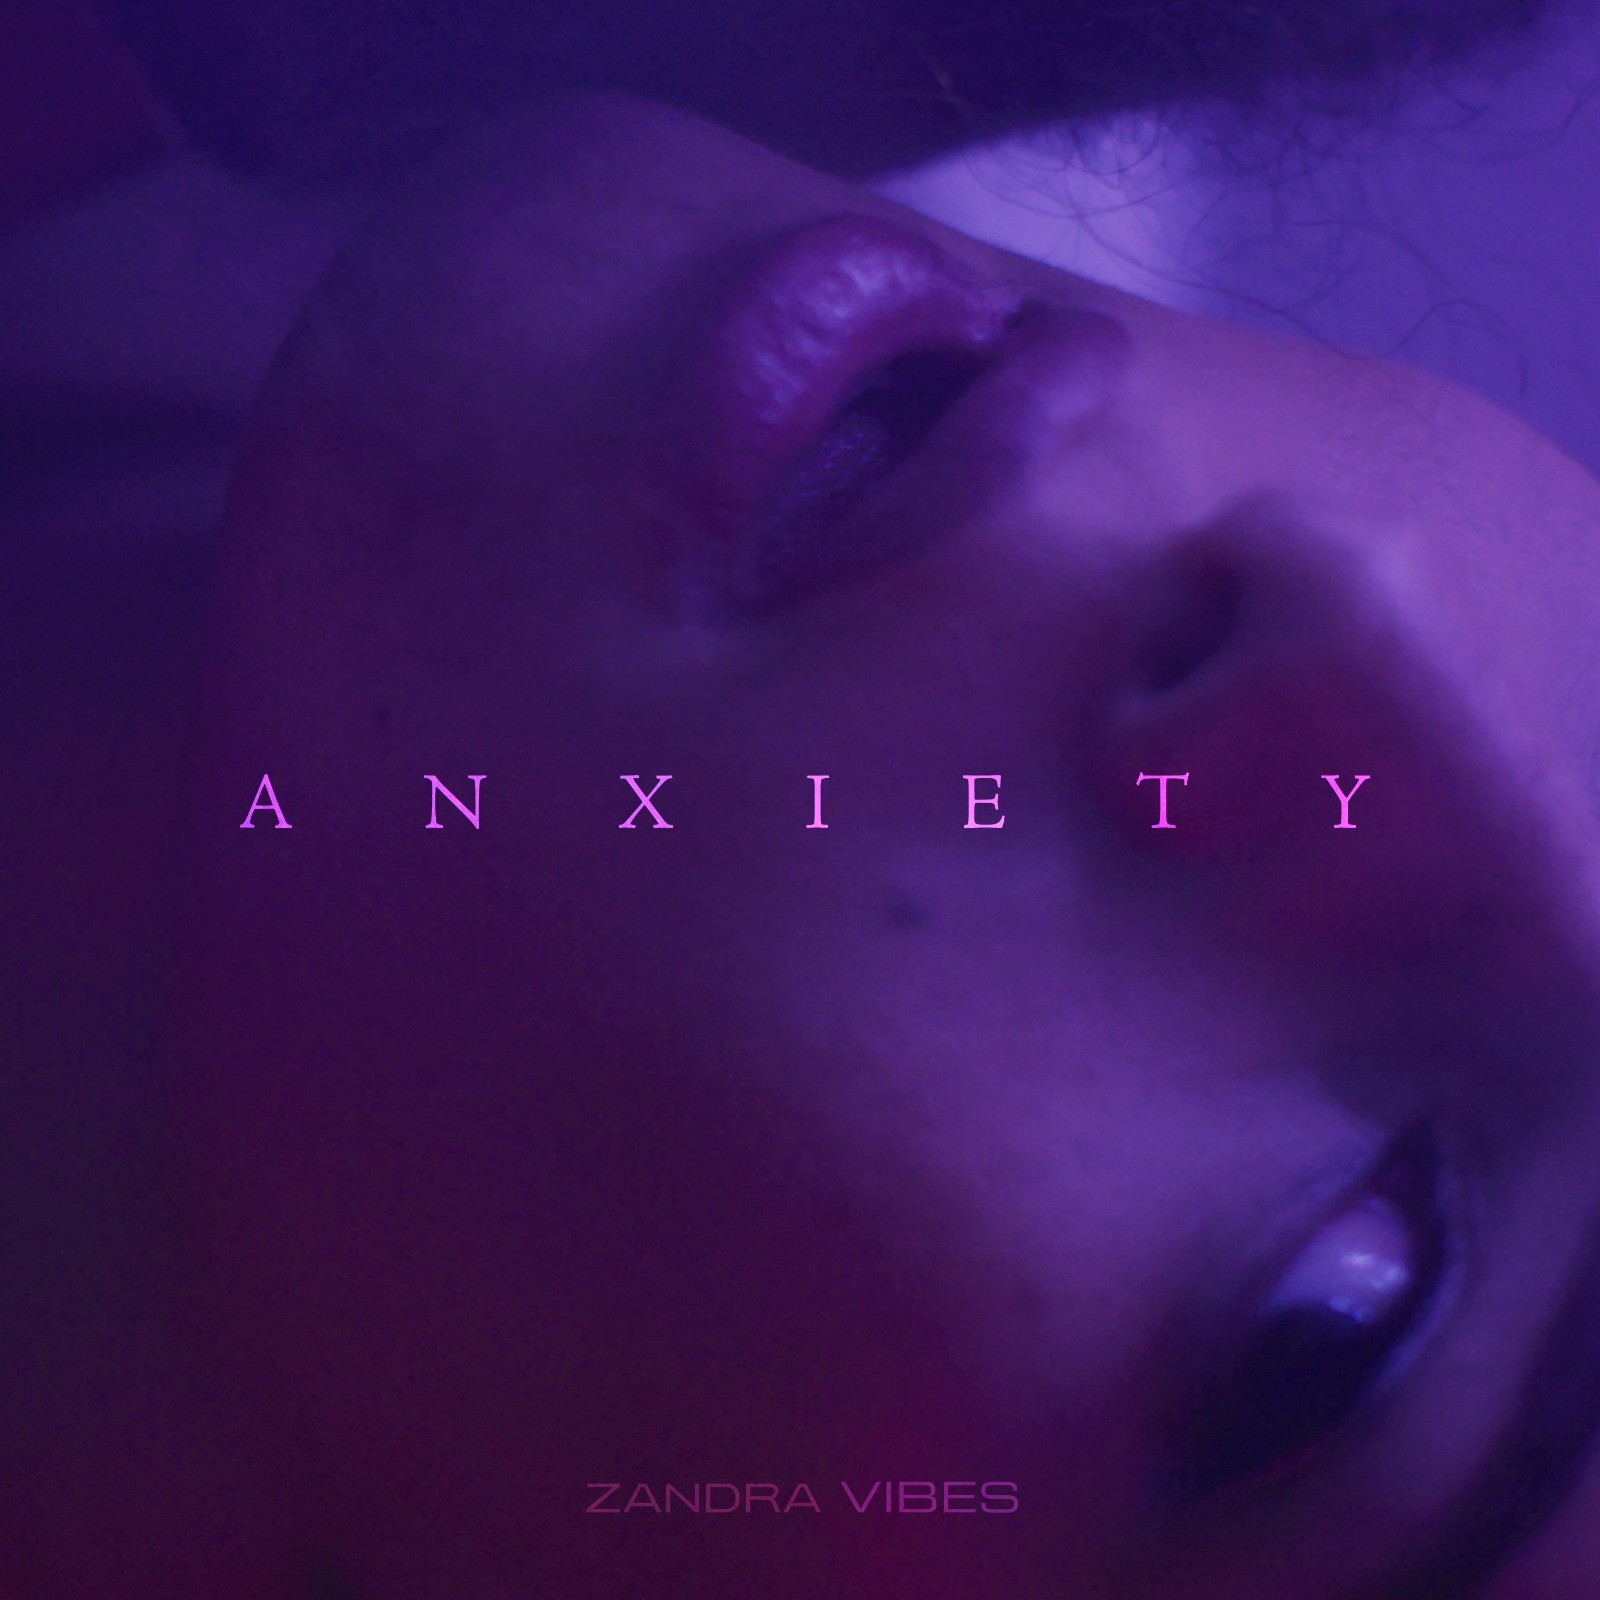 Zandra Vibes Announces the Release of her New Single “Anxiety”